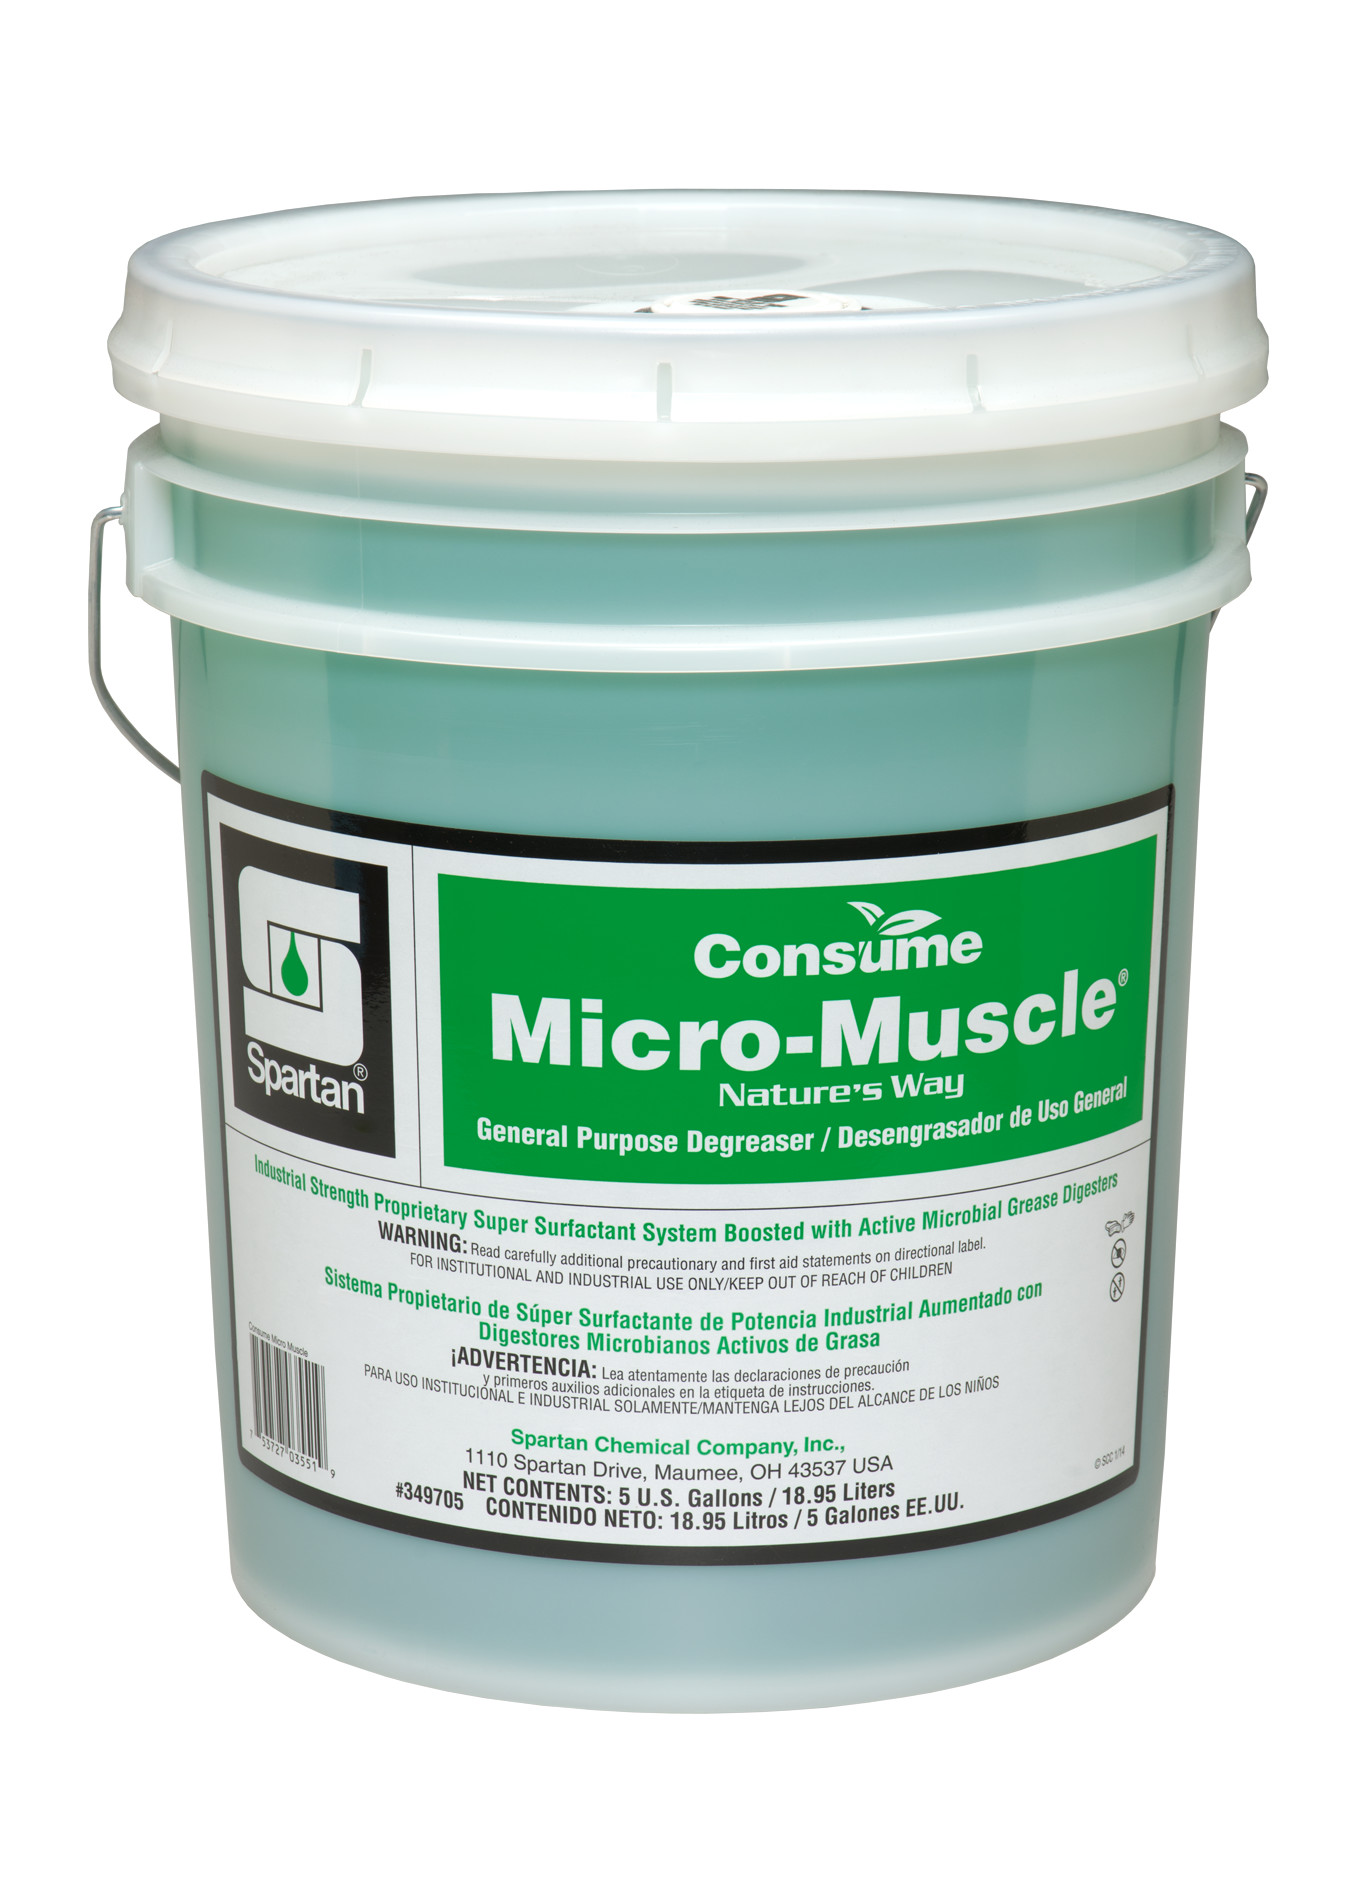 Spartan Chemical Company Consume Micro-Muscle, 5 GAL PAIL